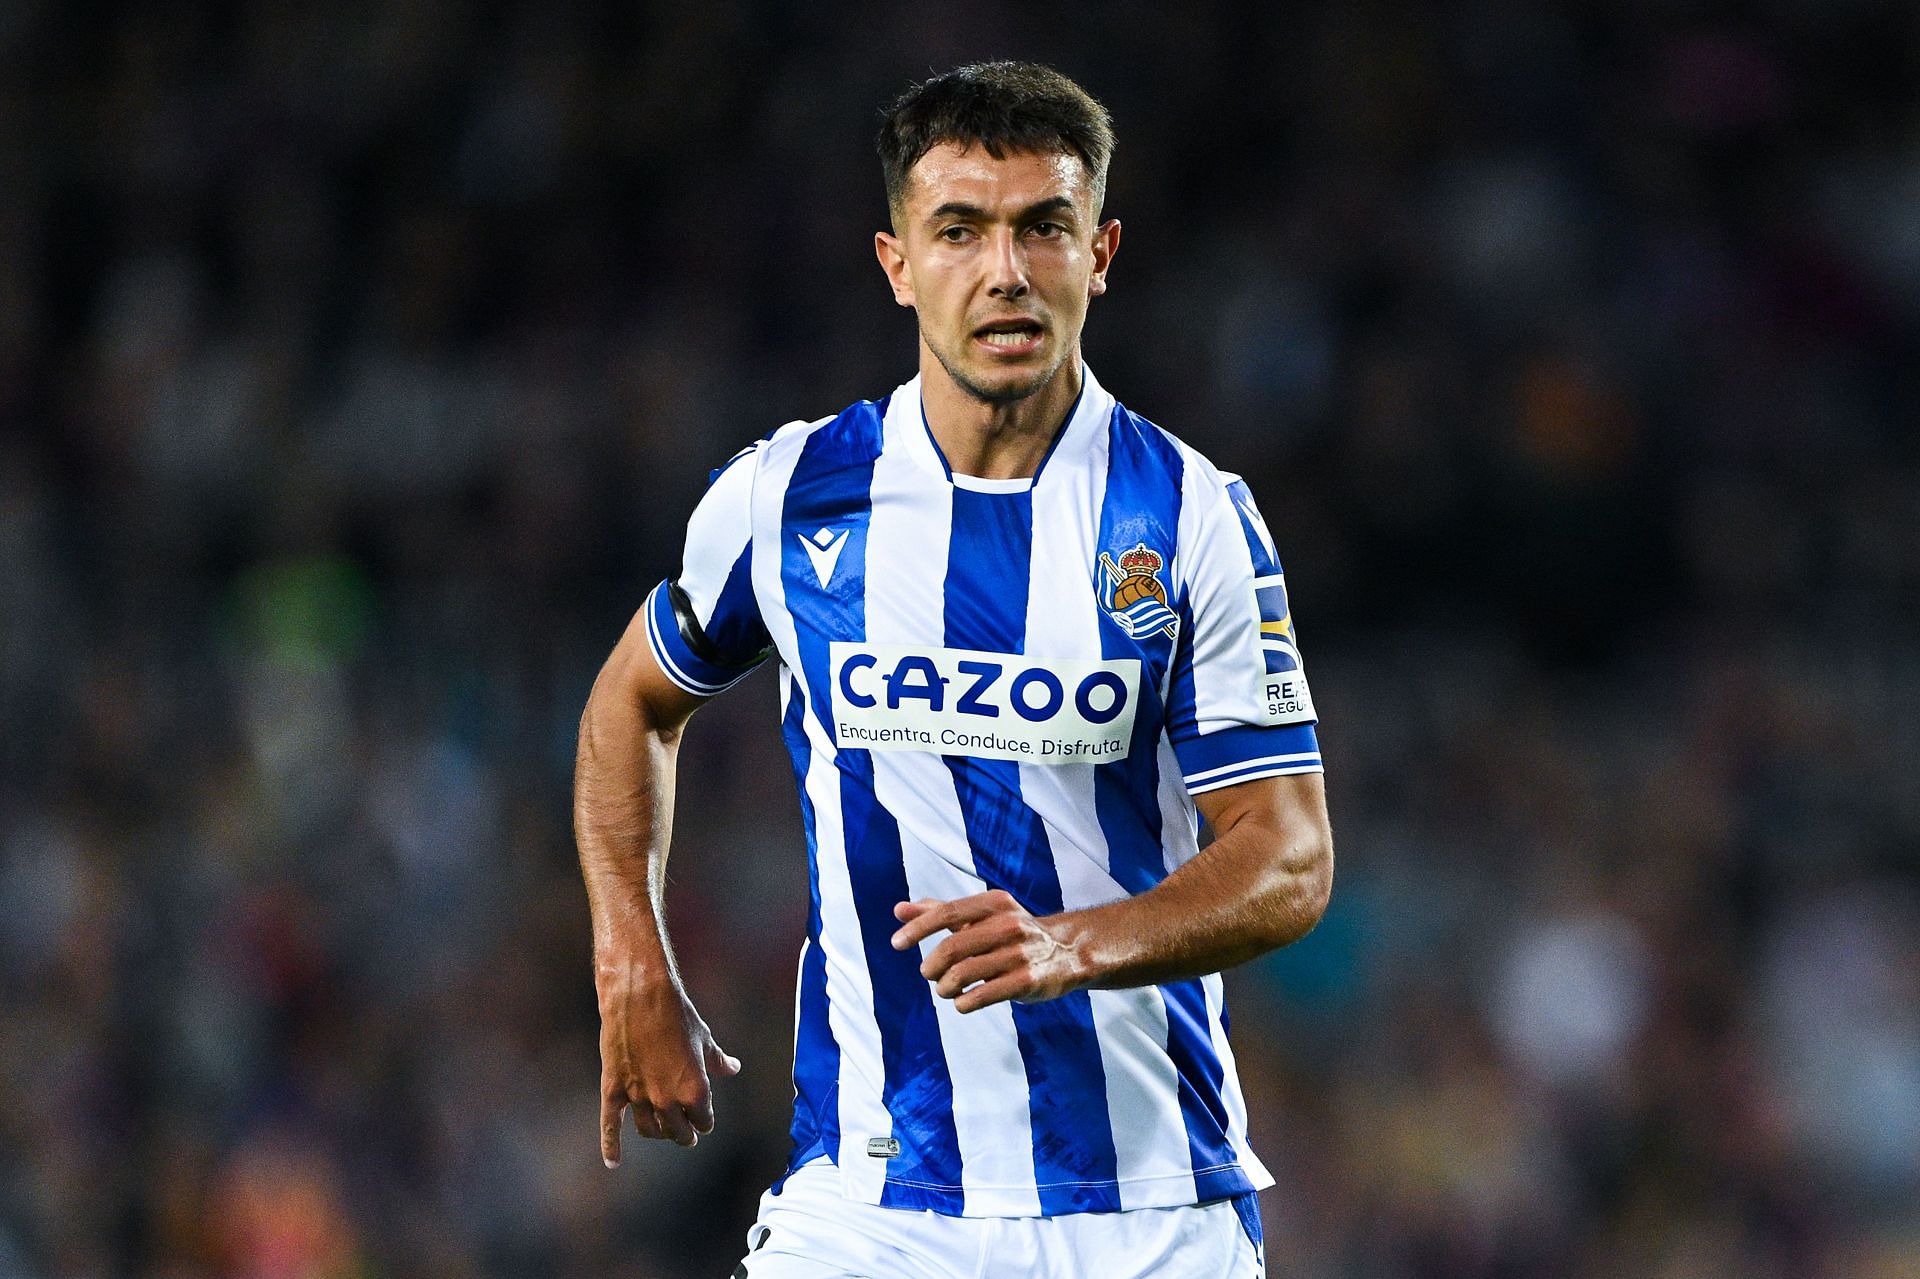 Martin Zubimendi appeared to play down transfer speculation. 